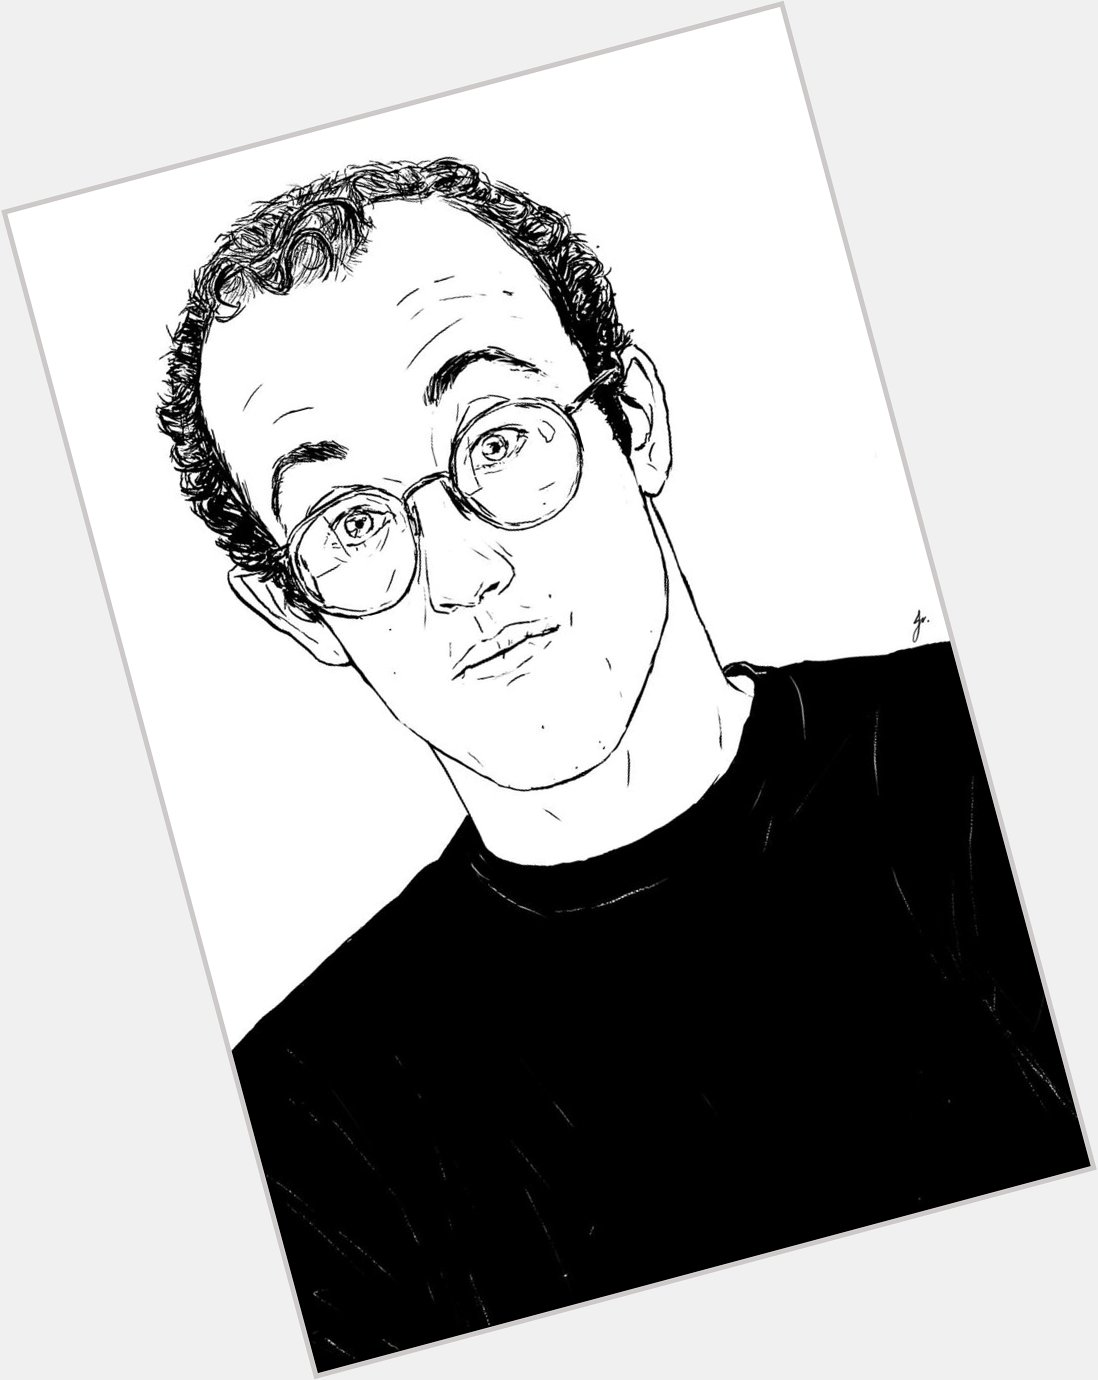 Happy 59th birthday Keith Haring! As is customary here are some of my Keith drawings of the past    